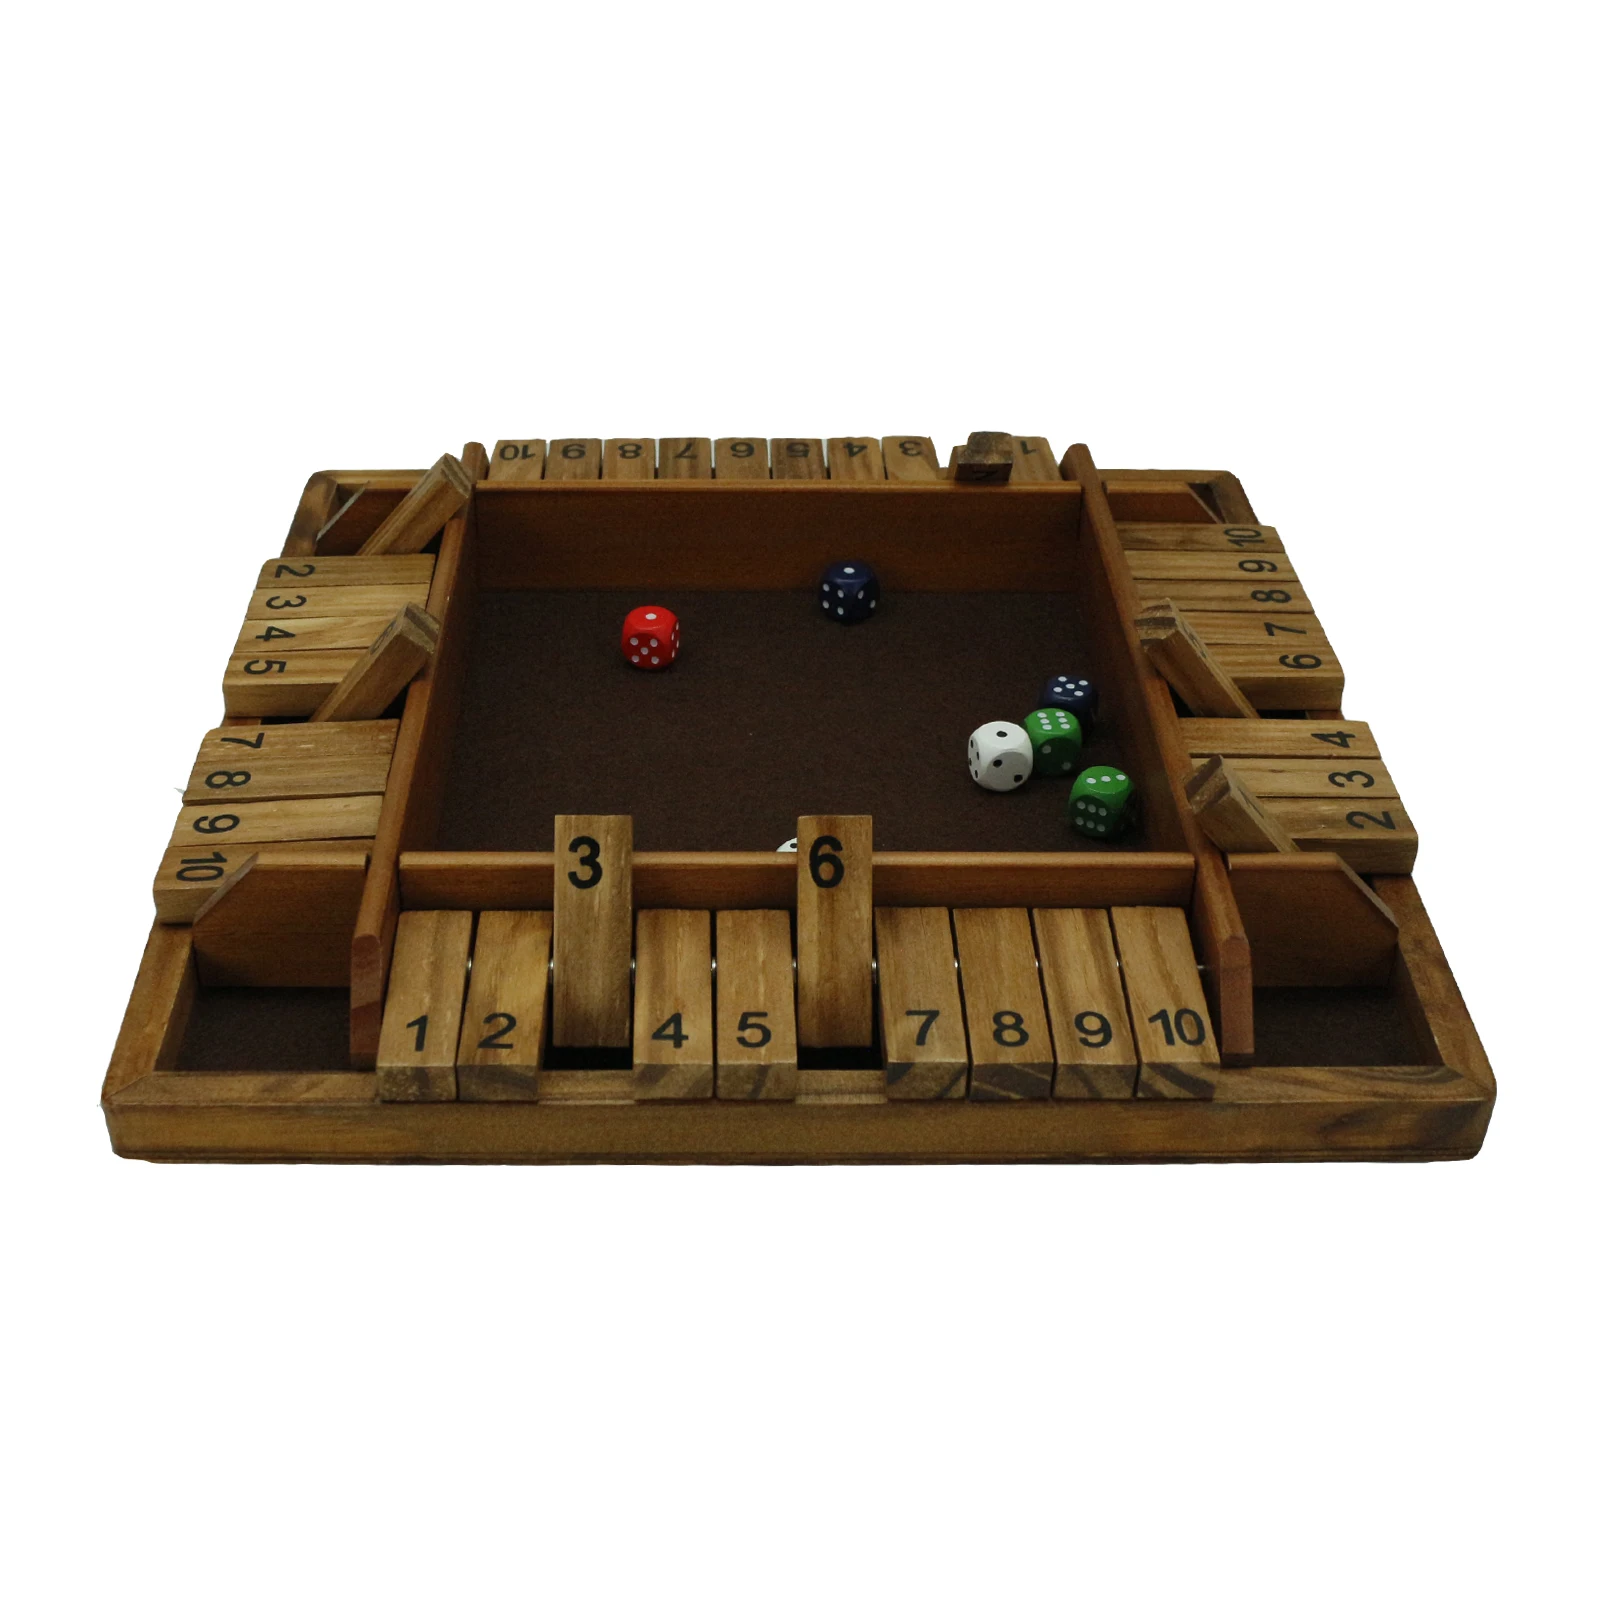 

Wooden 4 Players Shut The Box Dice Game Classics Tabletop Version and Pub Board GameVintage